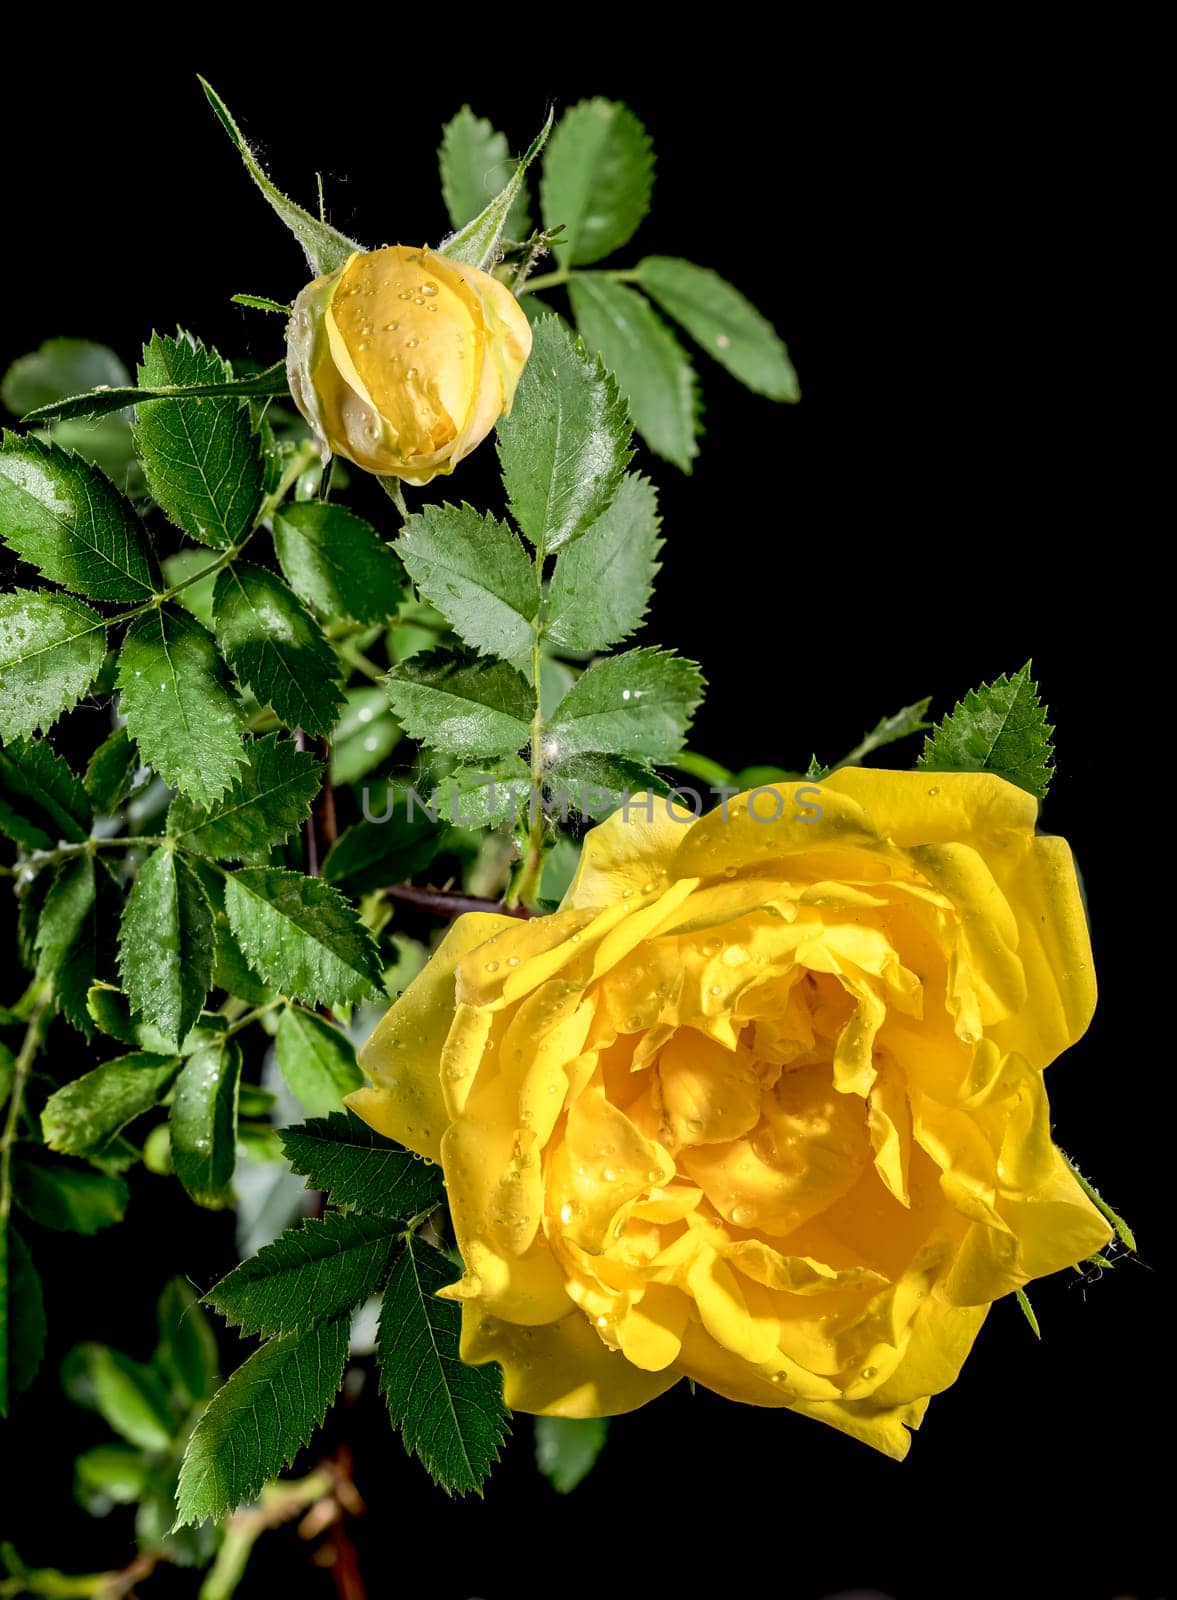 Beautiful Blooming yellow Climbing rose Golden Showers on a black background. Flower head close-up.